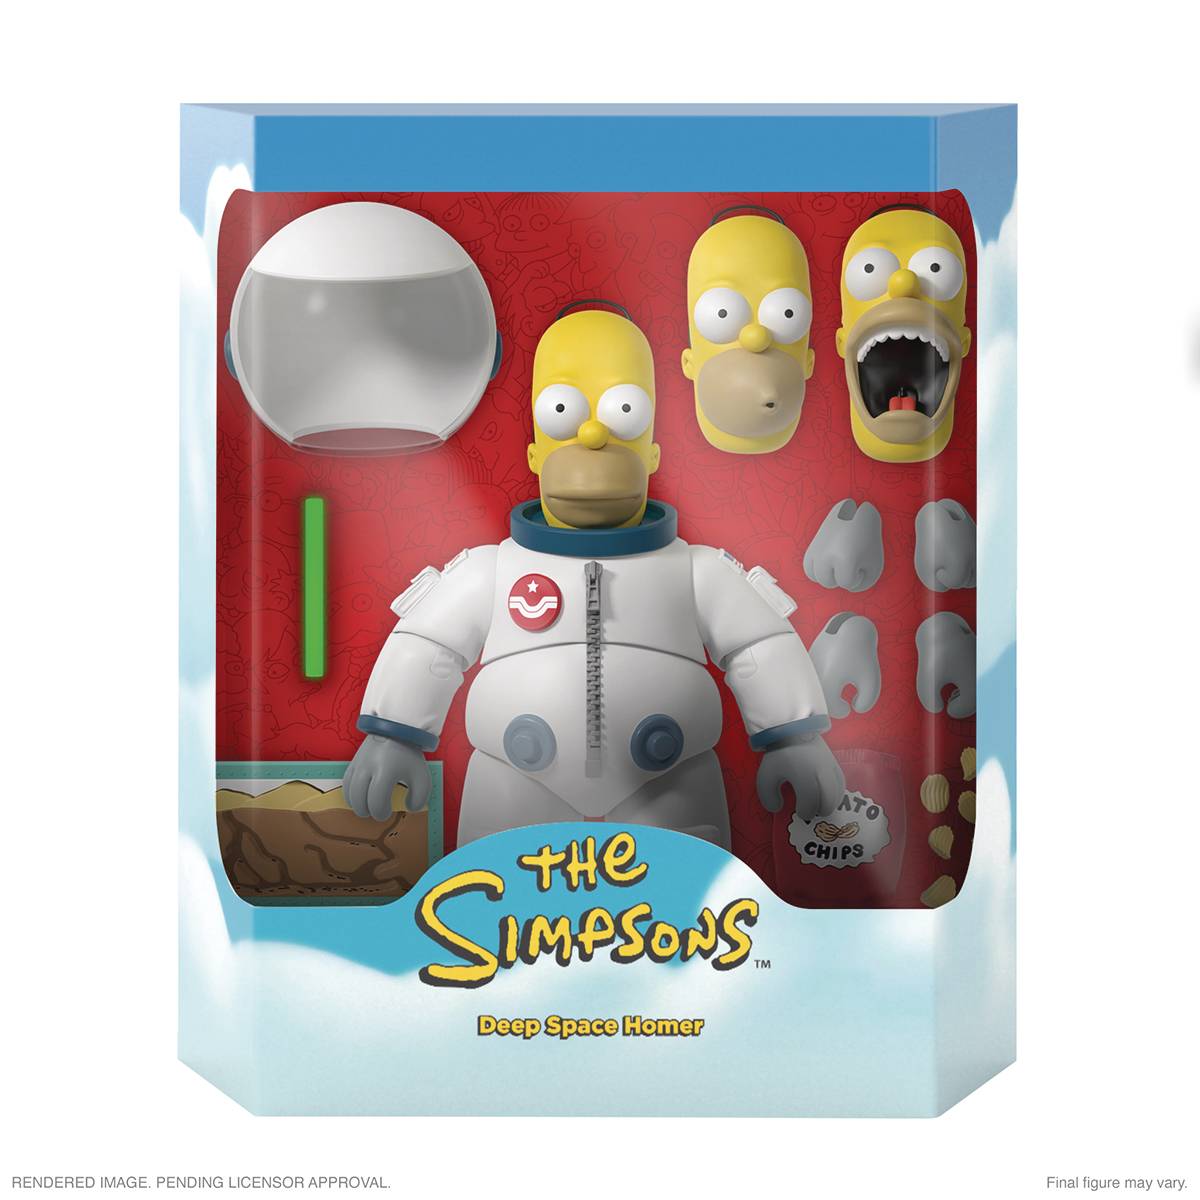 Super7: The Simpsons - Deep Space Homer